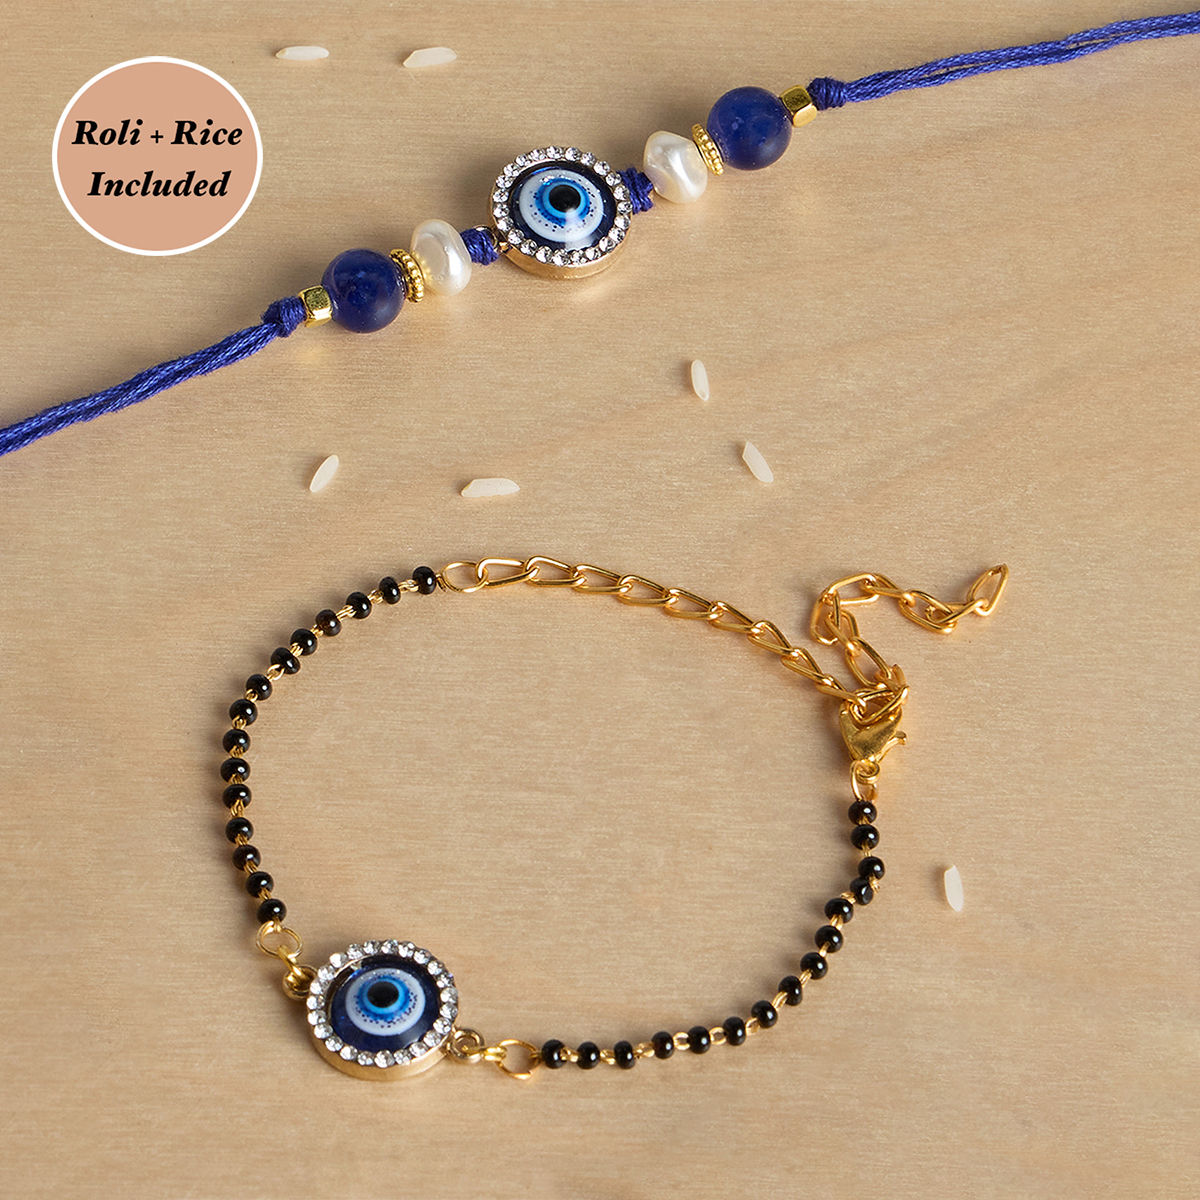 Pipa  Bella on Twitter Add meaning to your love symbols with a modern  twist Get up to 30 Off on all our Mangalsutra Bracelets Shop Now  httpstcovbNkiFZc17 PipaBella PipaBellaJewellery Mangalsutra  Jewellery 